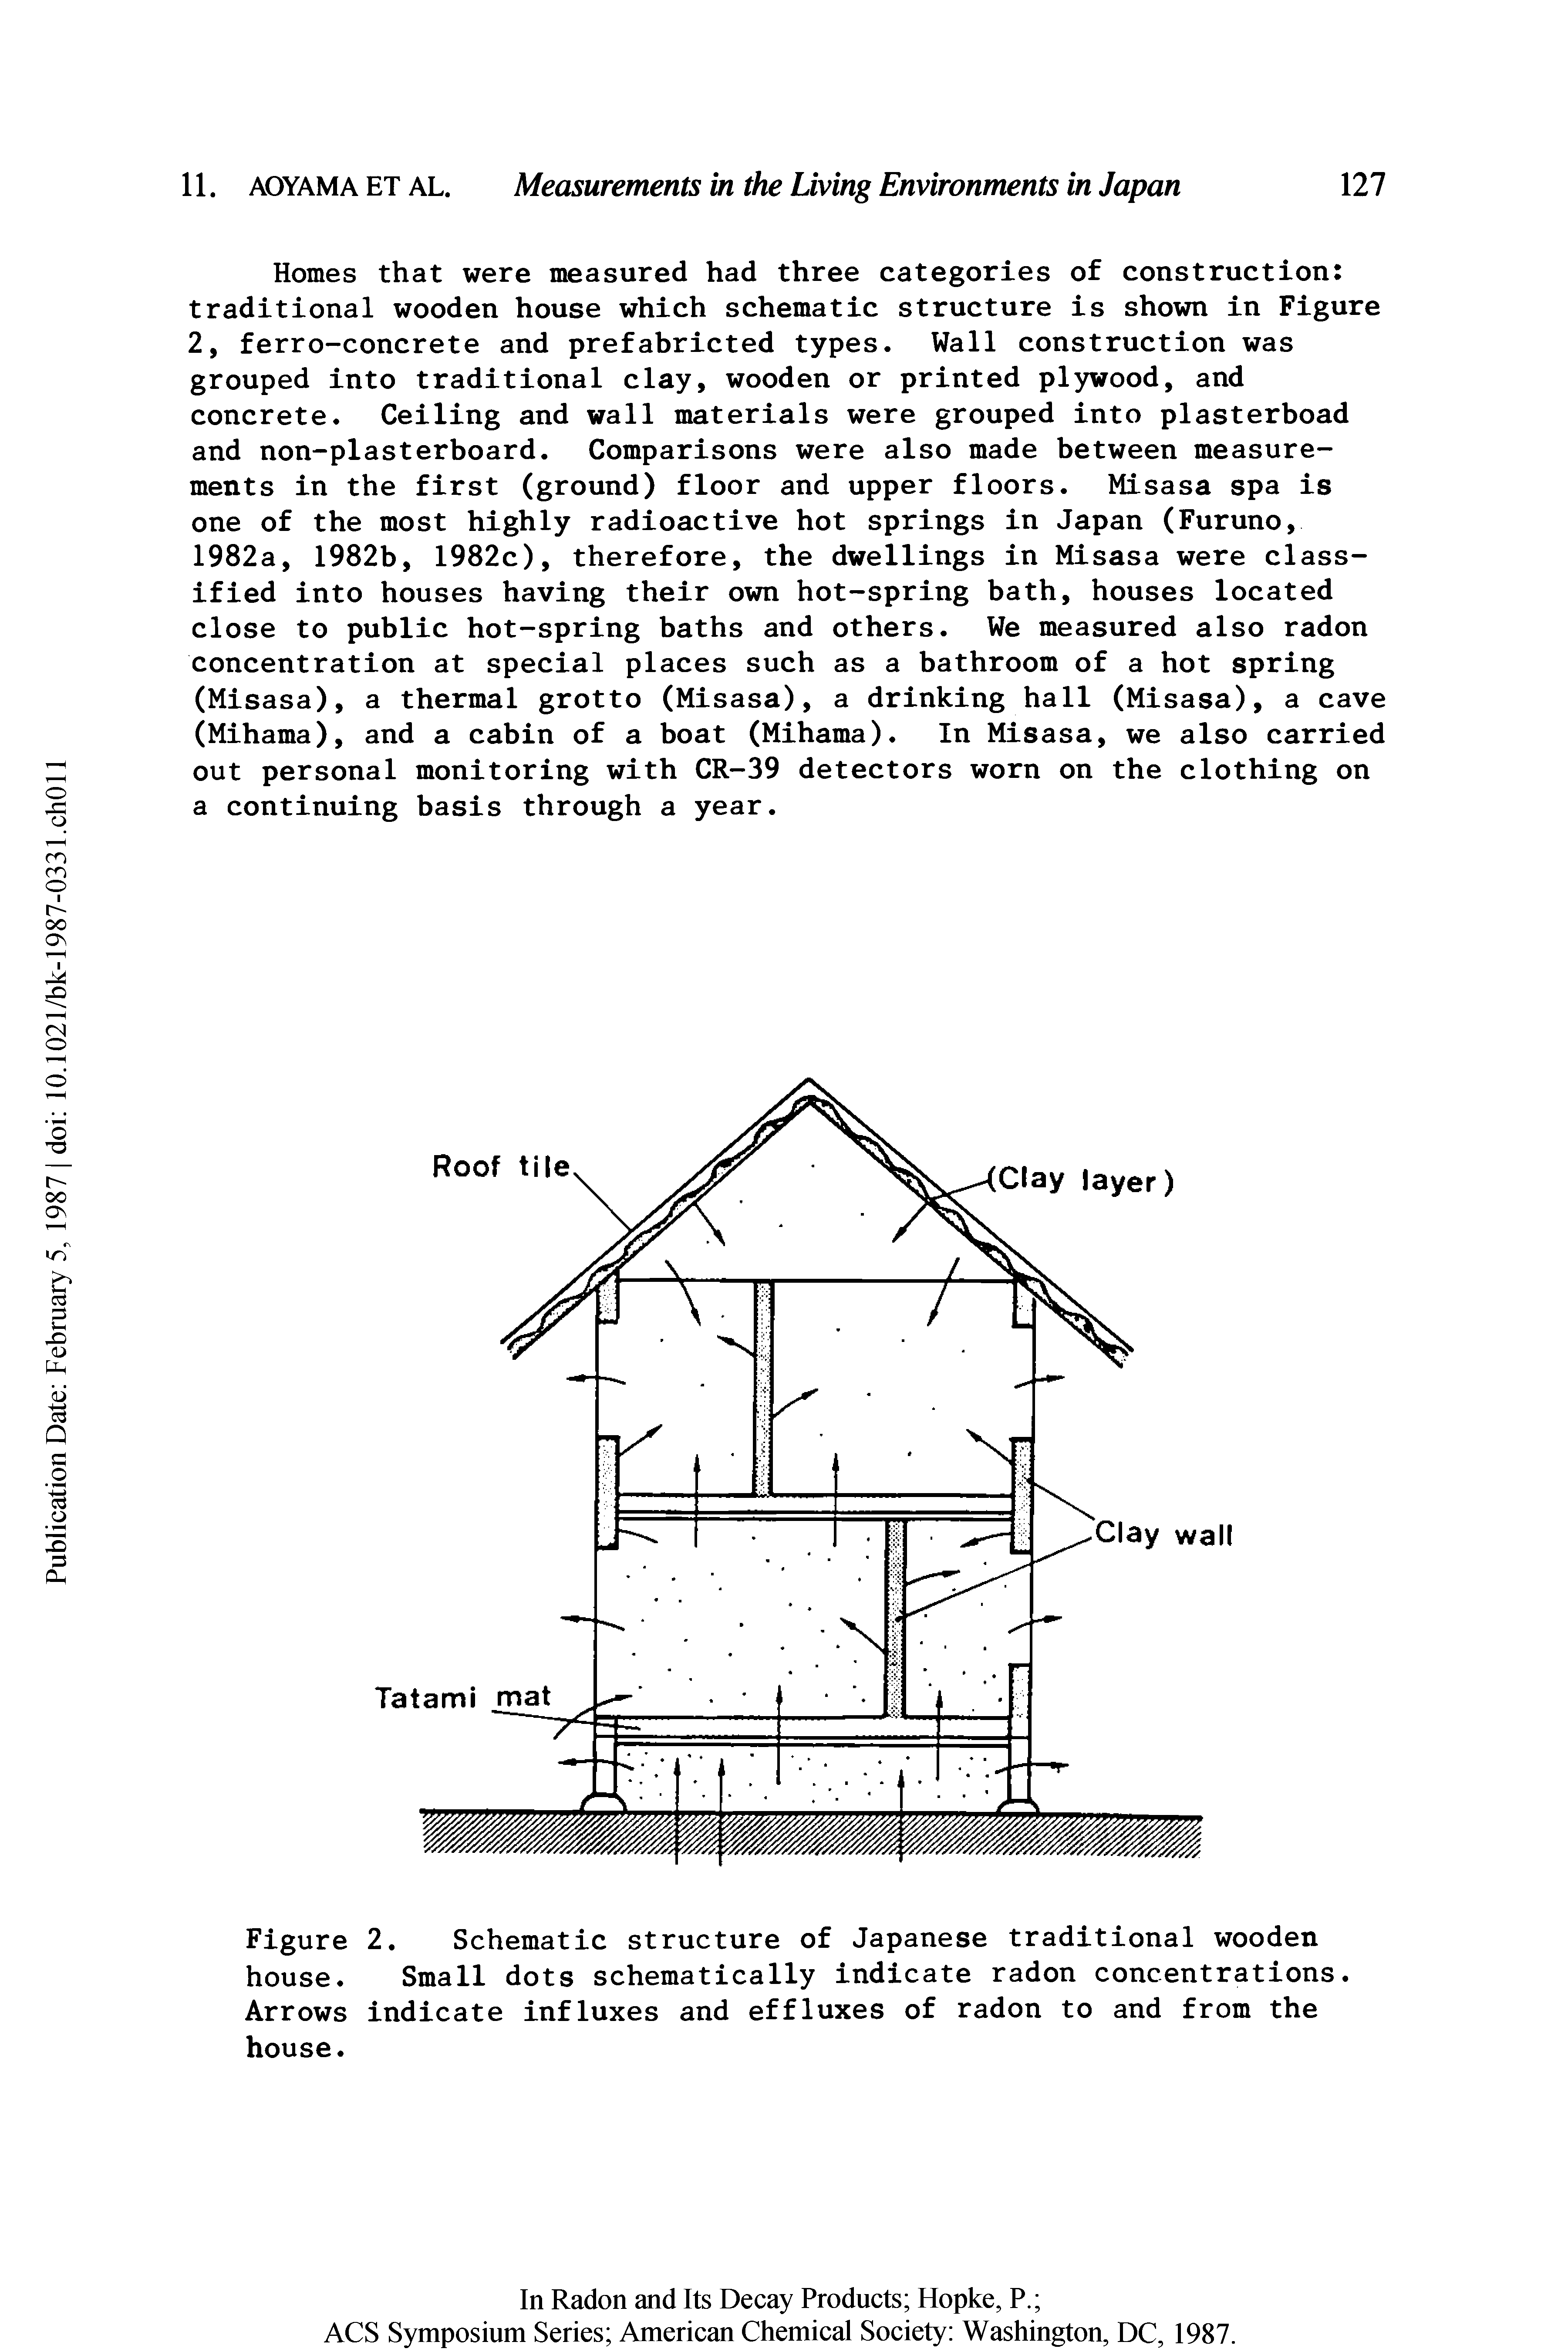 Figure 2. Schematic structure of Japanese traditional wooden house. Small dots schematically indicate radon concentrations. Arrows indicate influxes and effluxes of radon to and from the house.